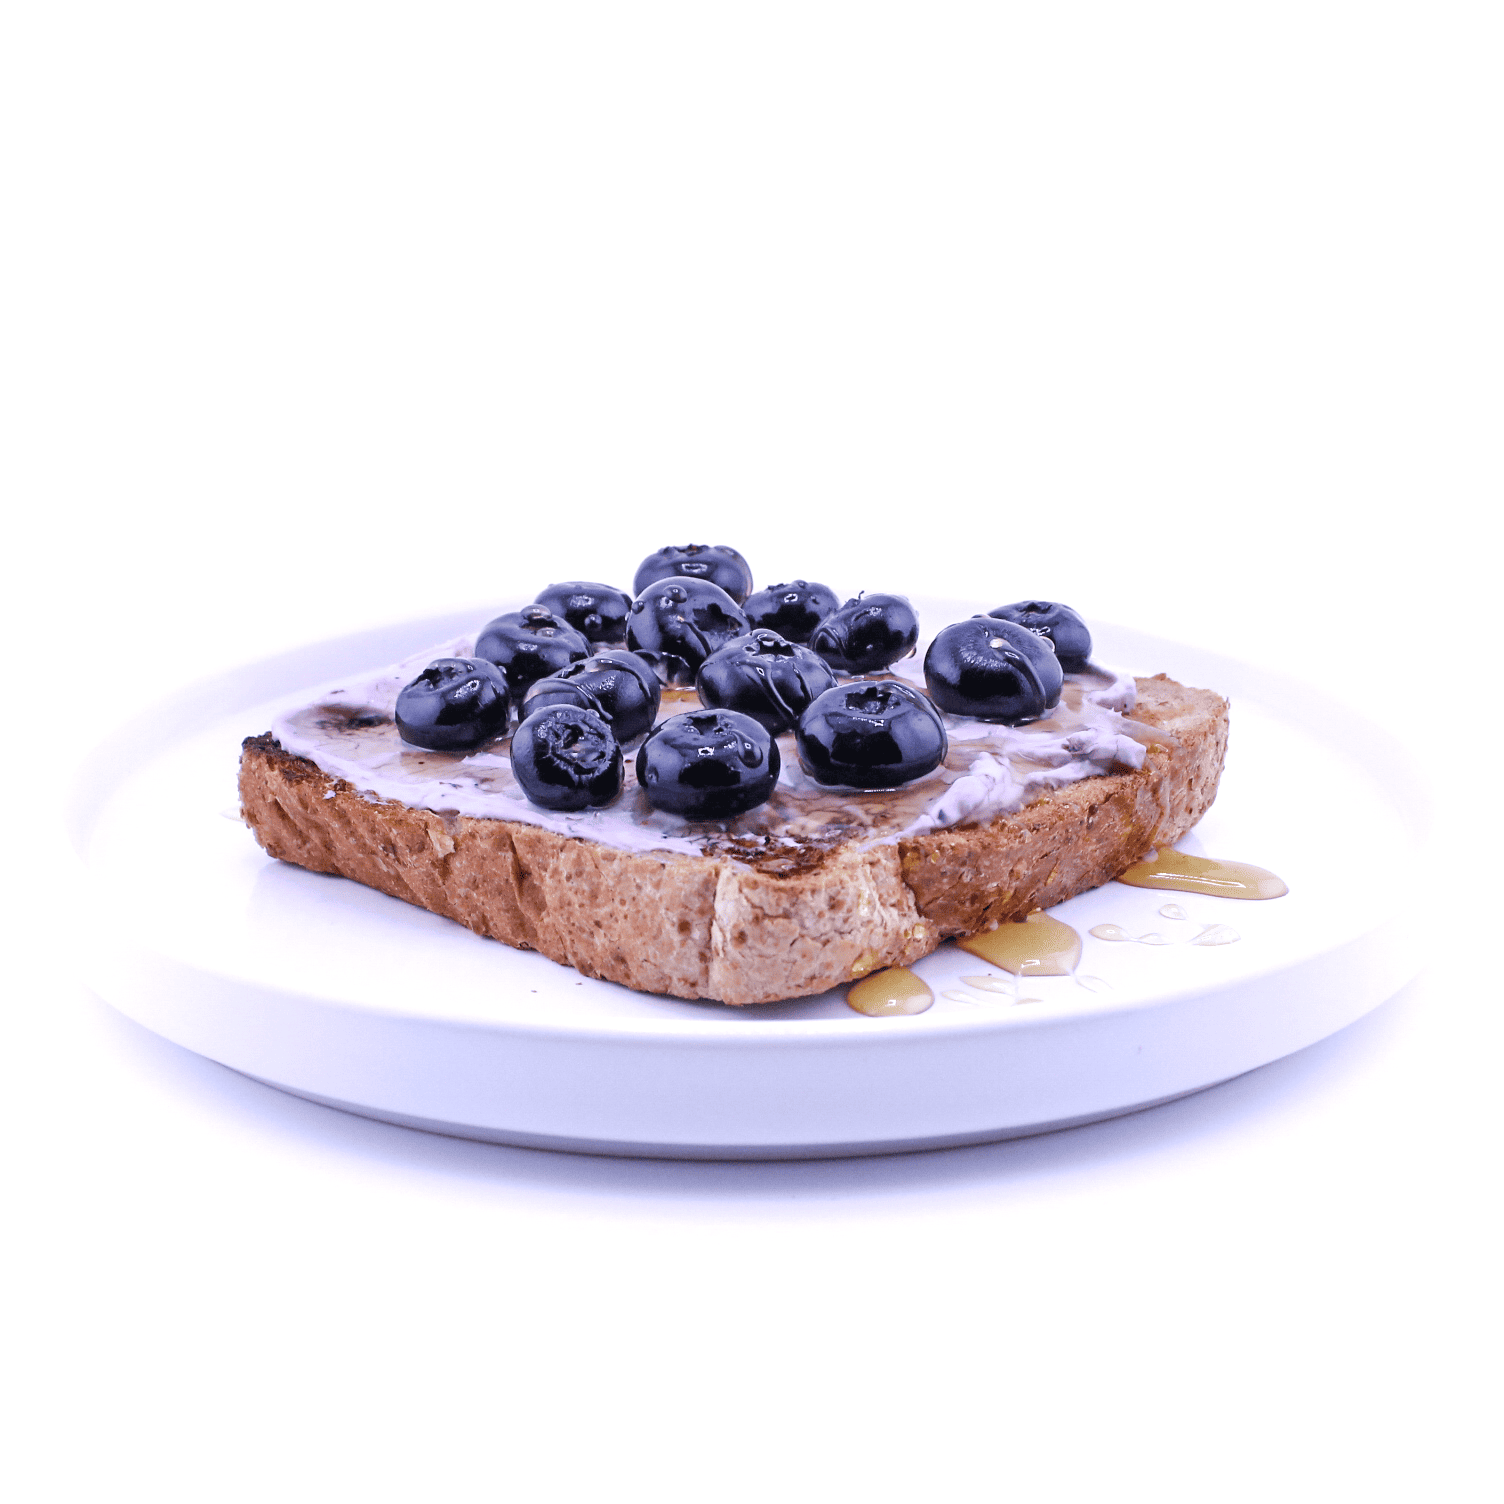 Blueberry Toast - Blueberry cream cheese, blueberries, honey drizzle on toasted honey wheat, Vegetarian